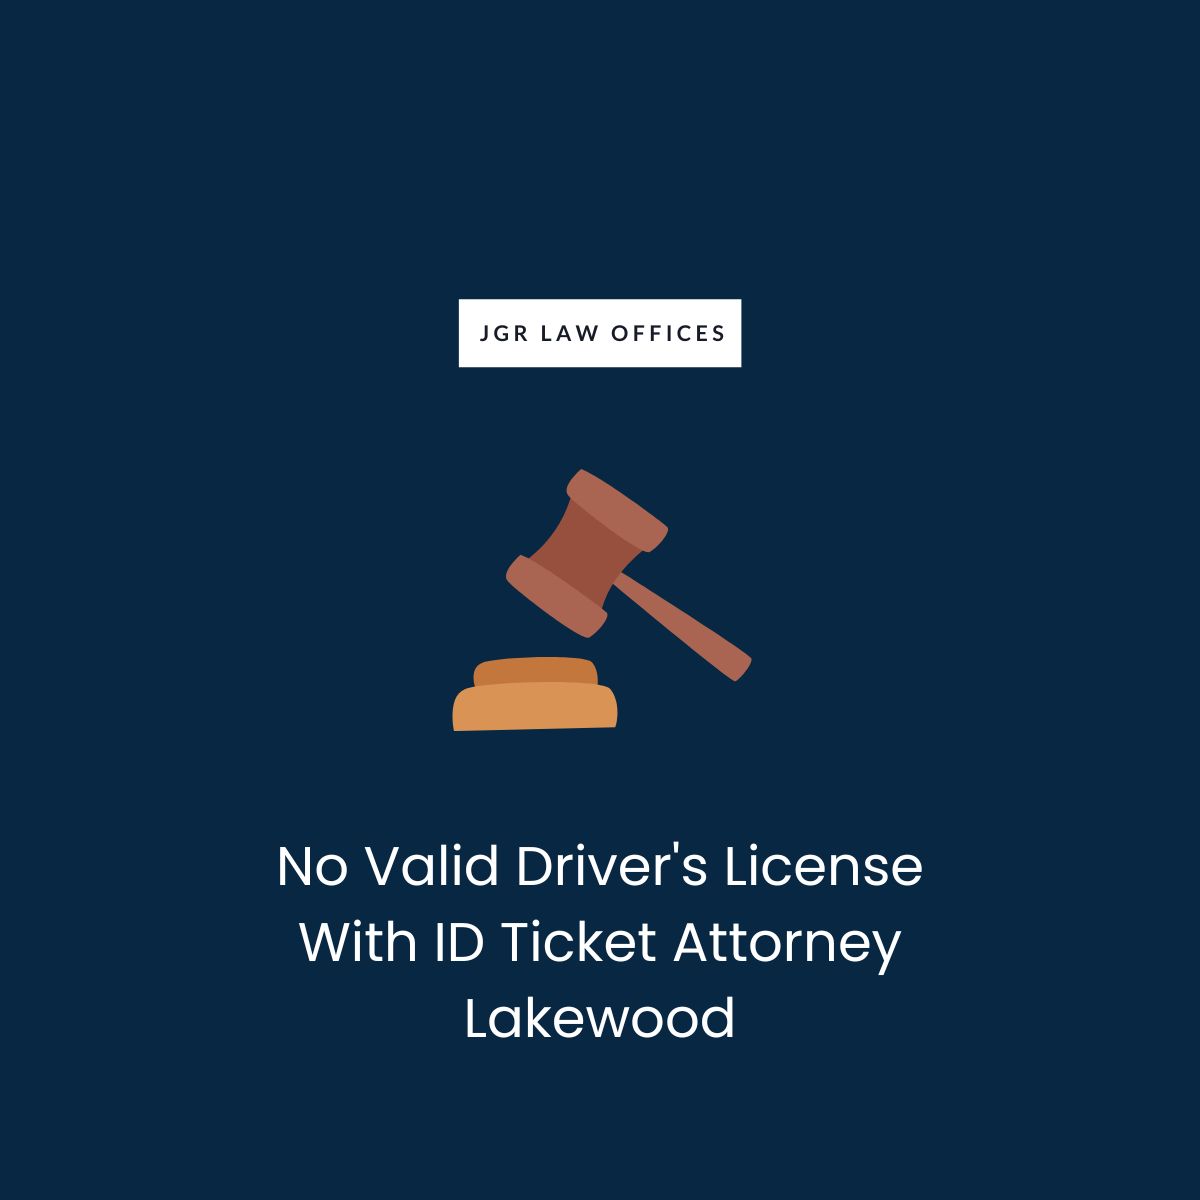 No Valid Driver's License With ID Ticket Attorney Lakewood